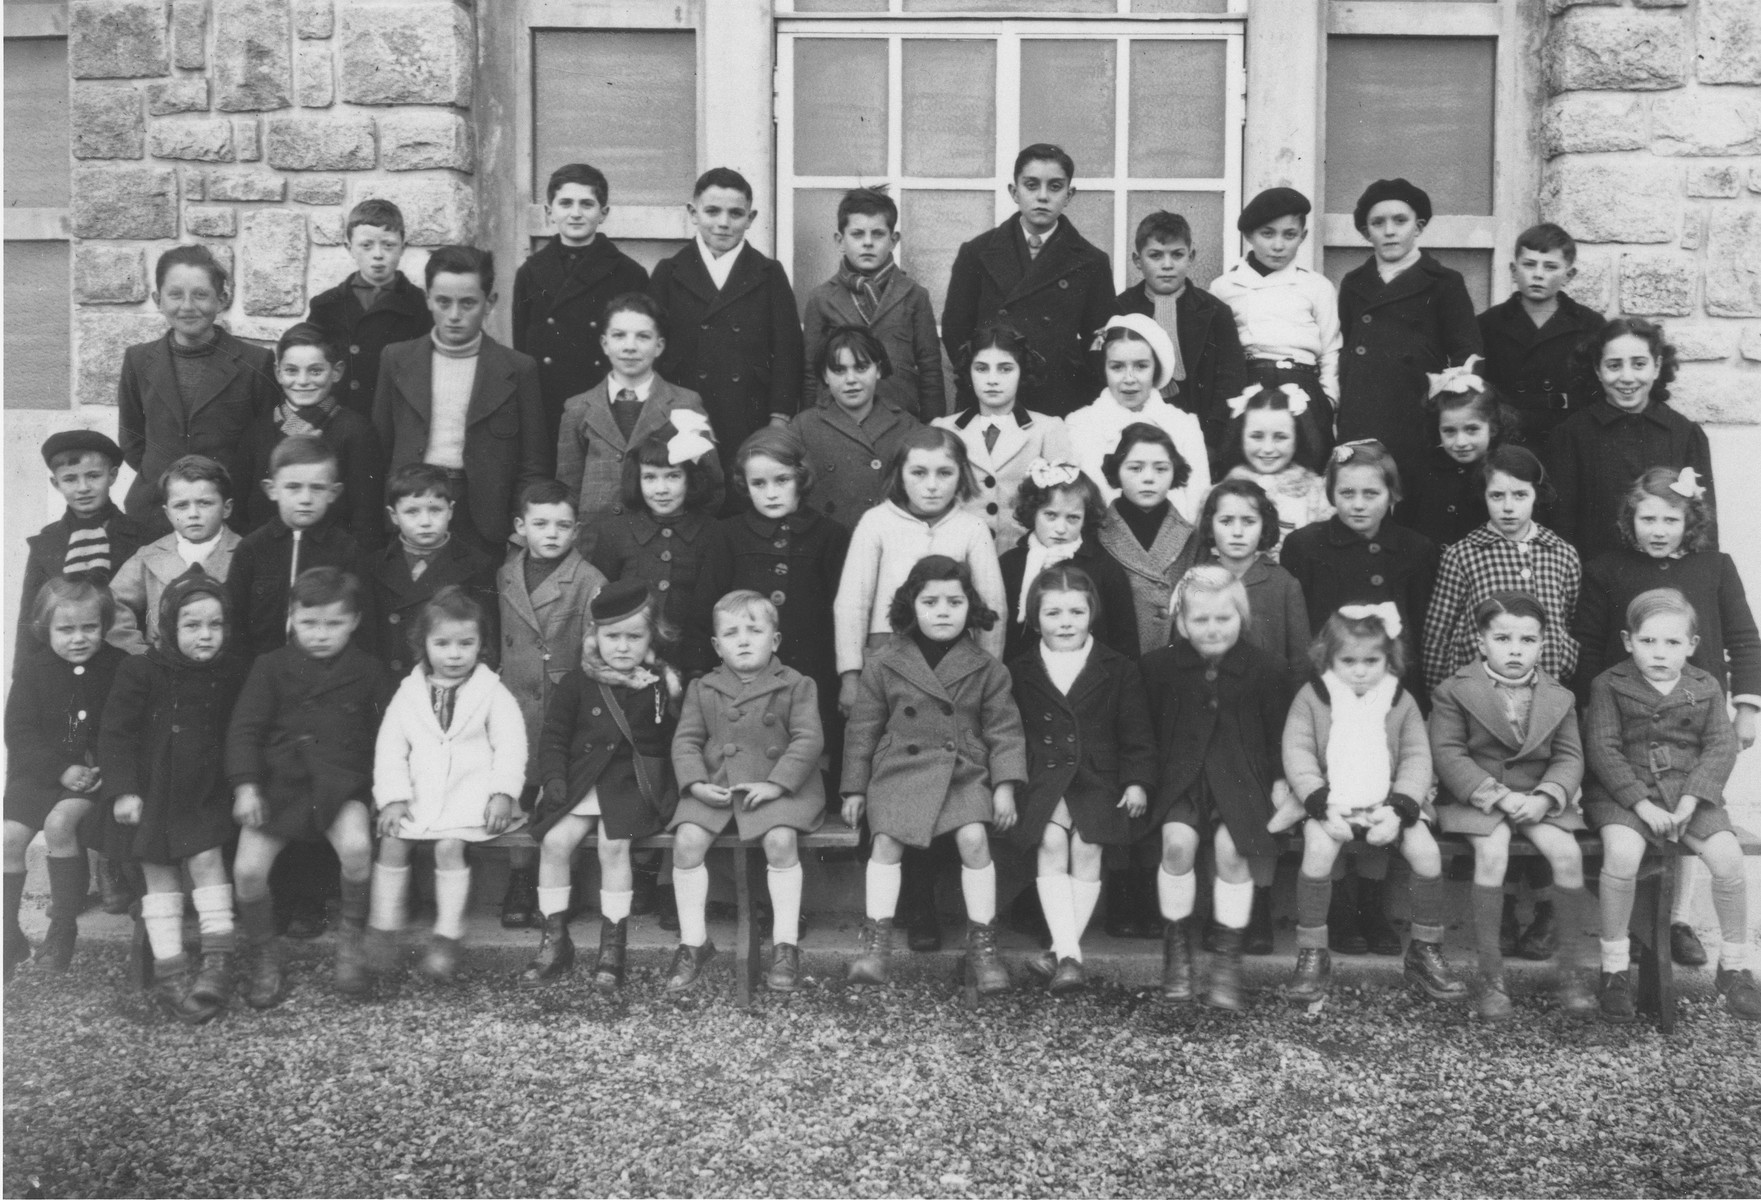 Ruth Zarnicer (third row from the front, far right) poses with her classmates in the Jeanne d'Arc convent school, where she was hiding under the name Rene Latti.